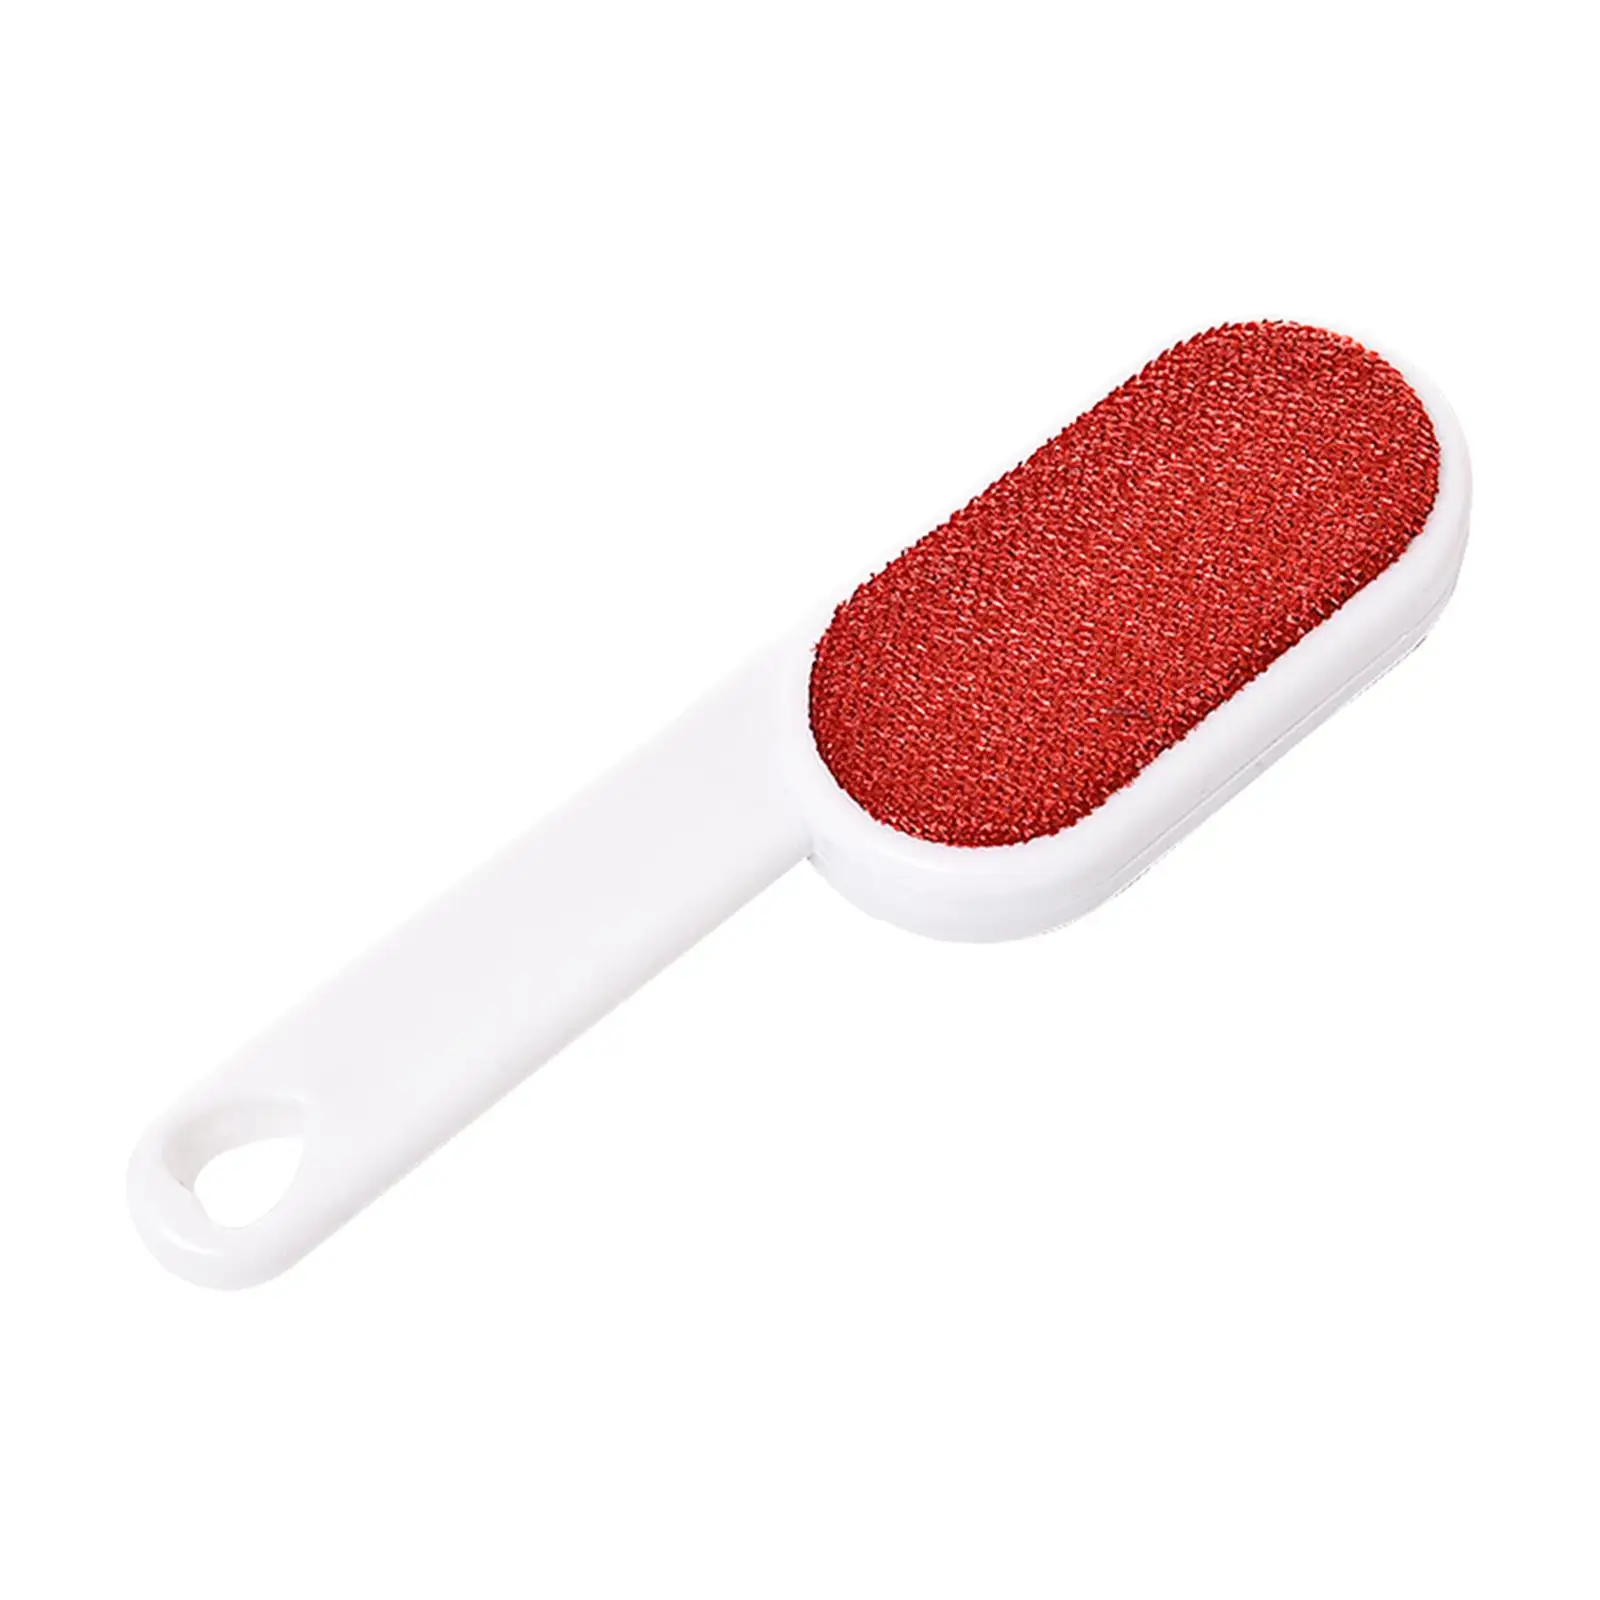 Lint Remover Brush Manual Effective Double Sided Portable Lint Cleaner Pet Hair Remover for Garment Carpet Rug Sweater Blanket